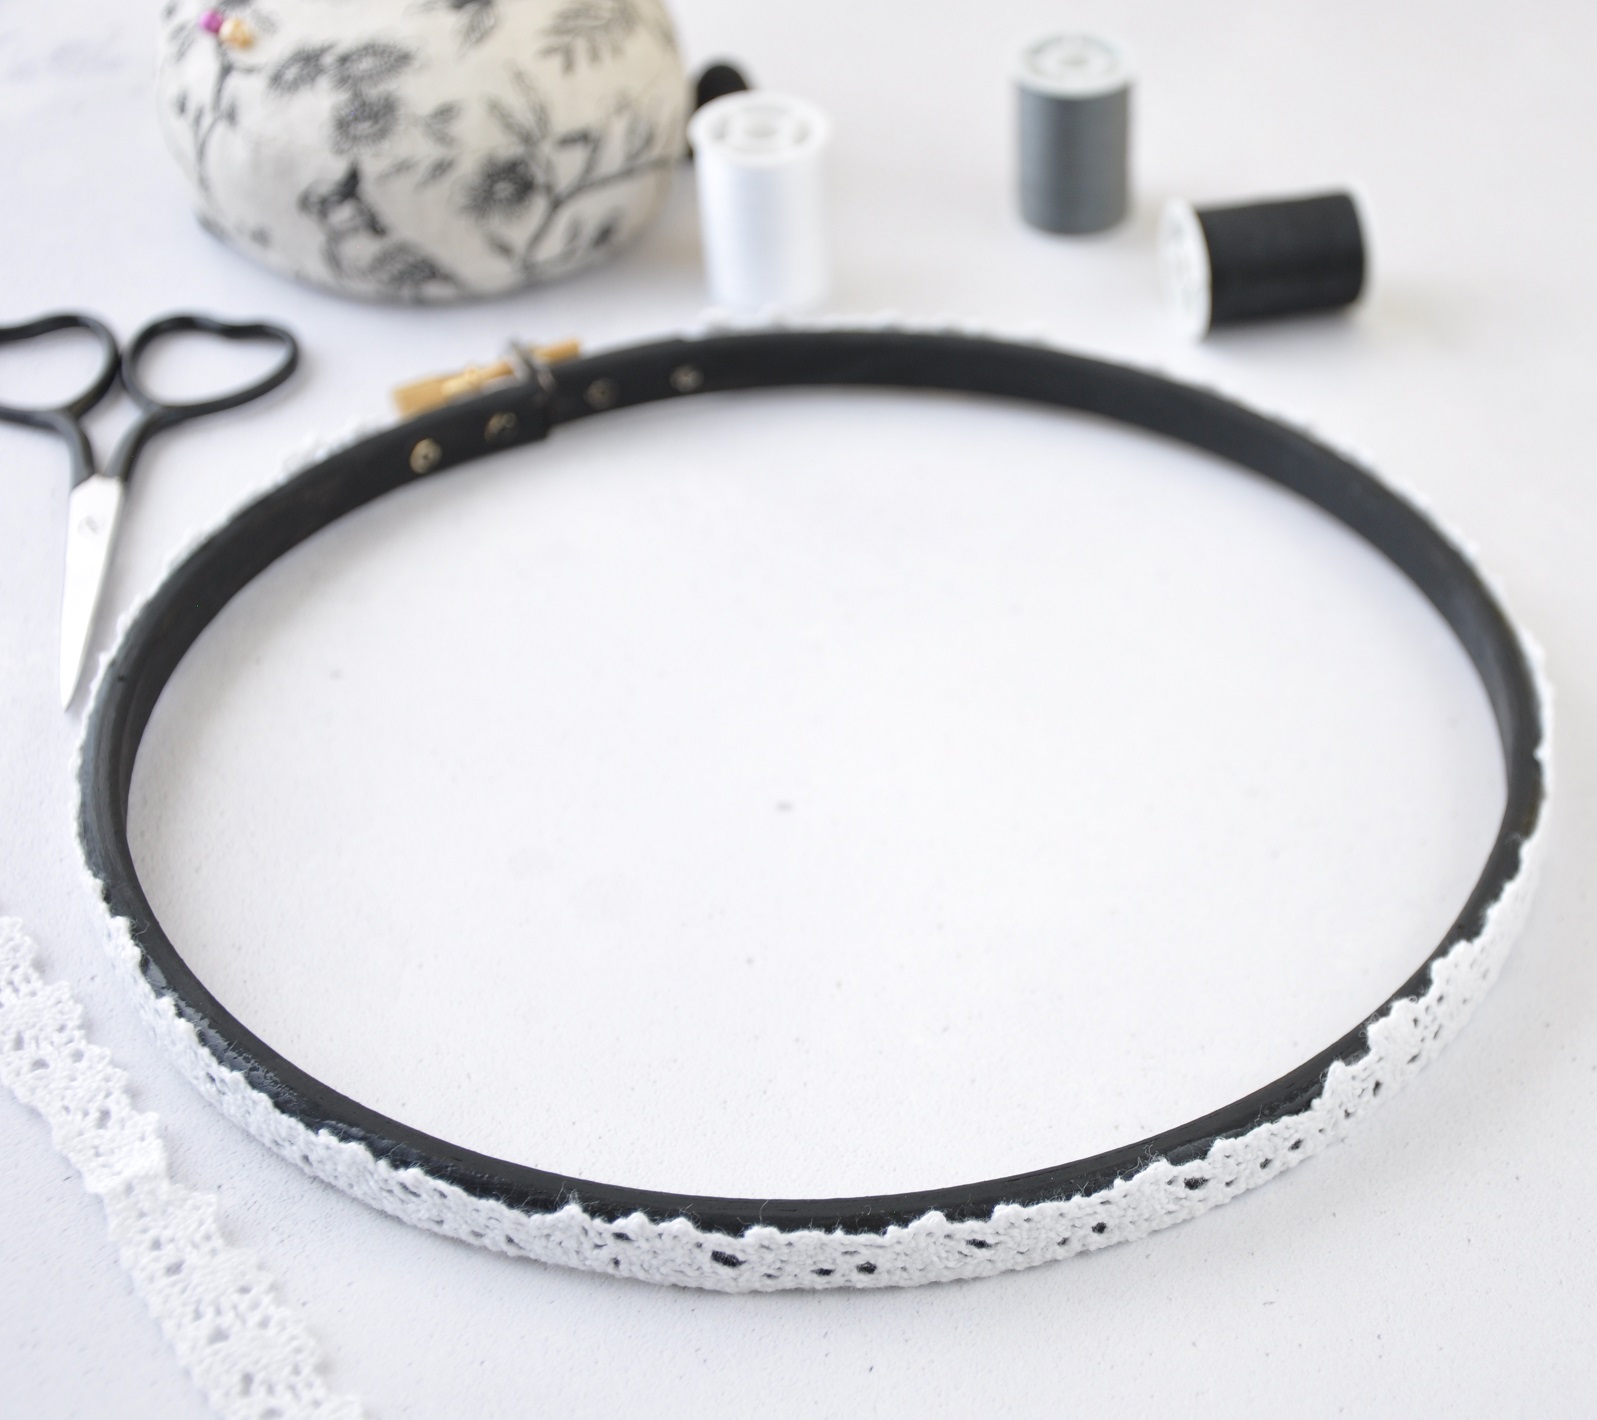 How to decorate an embroidery hoop: painting method